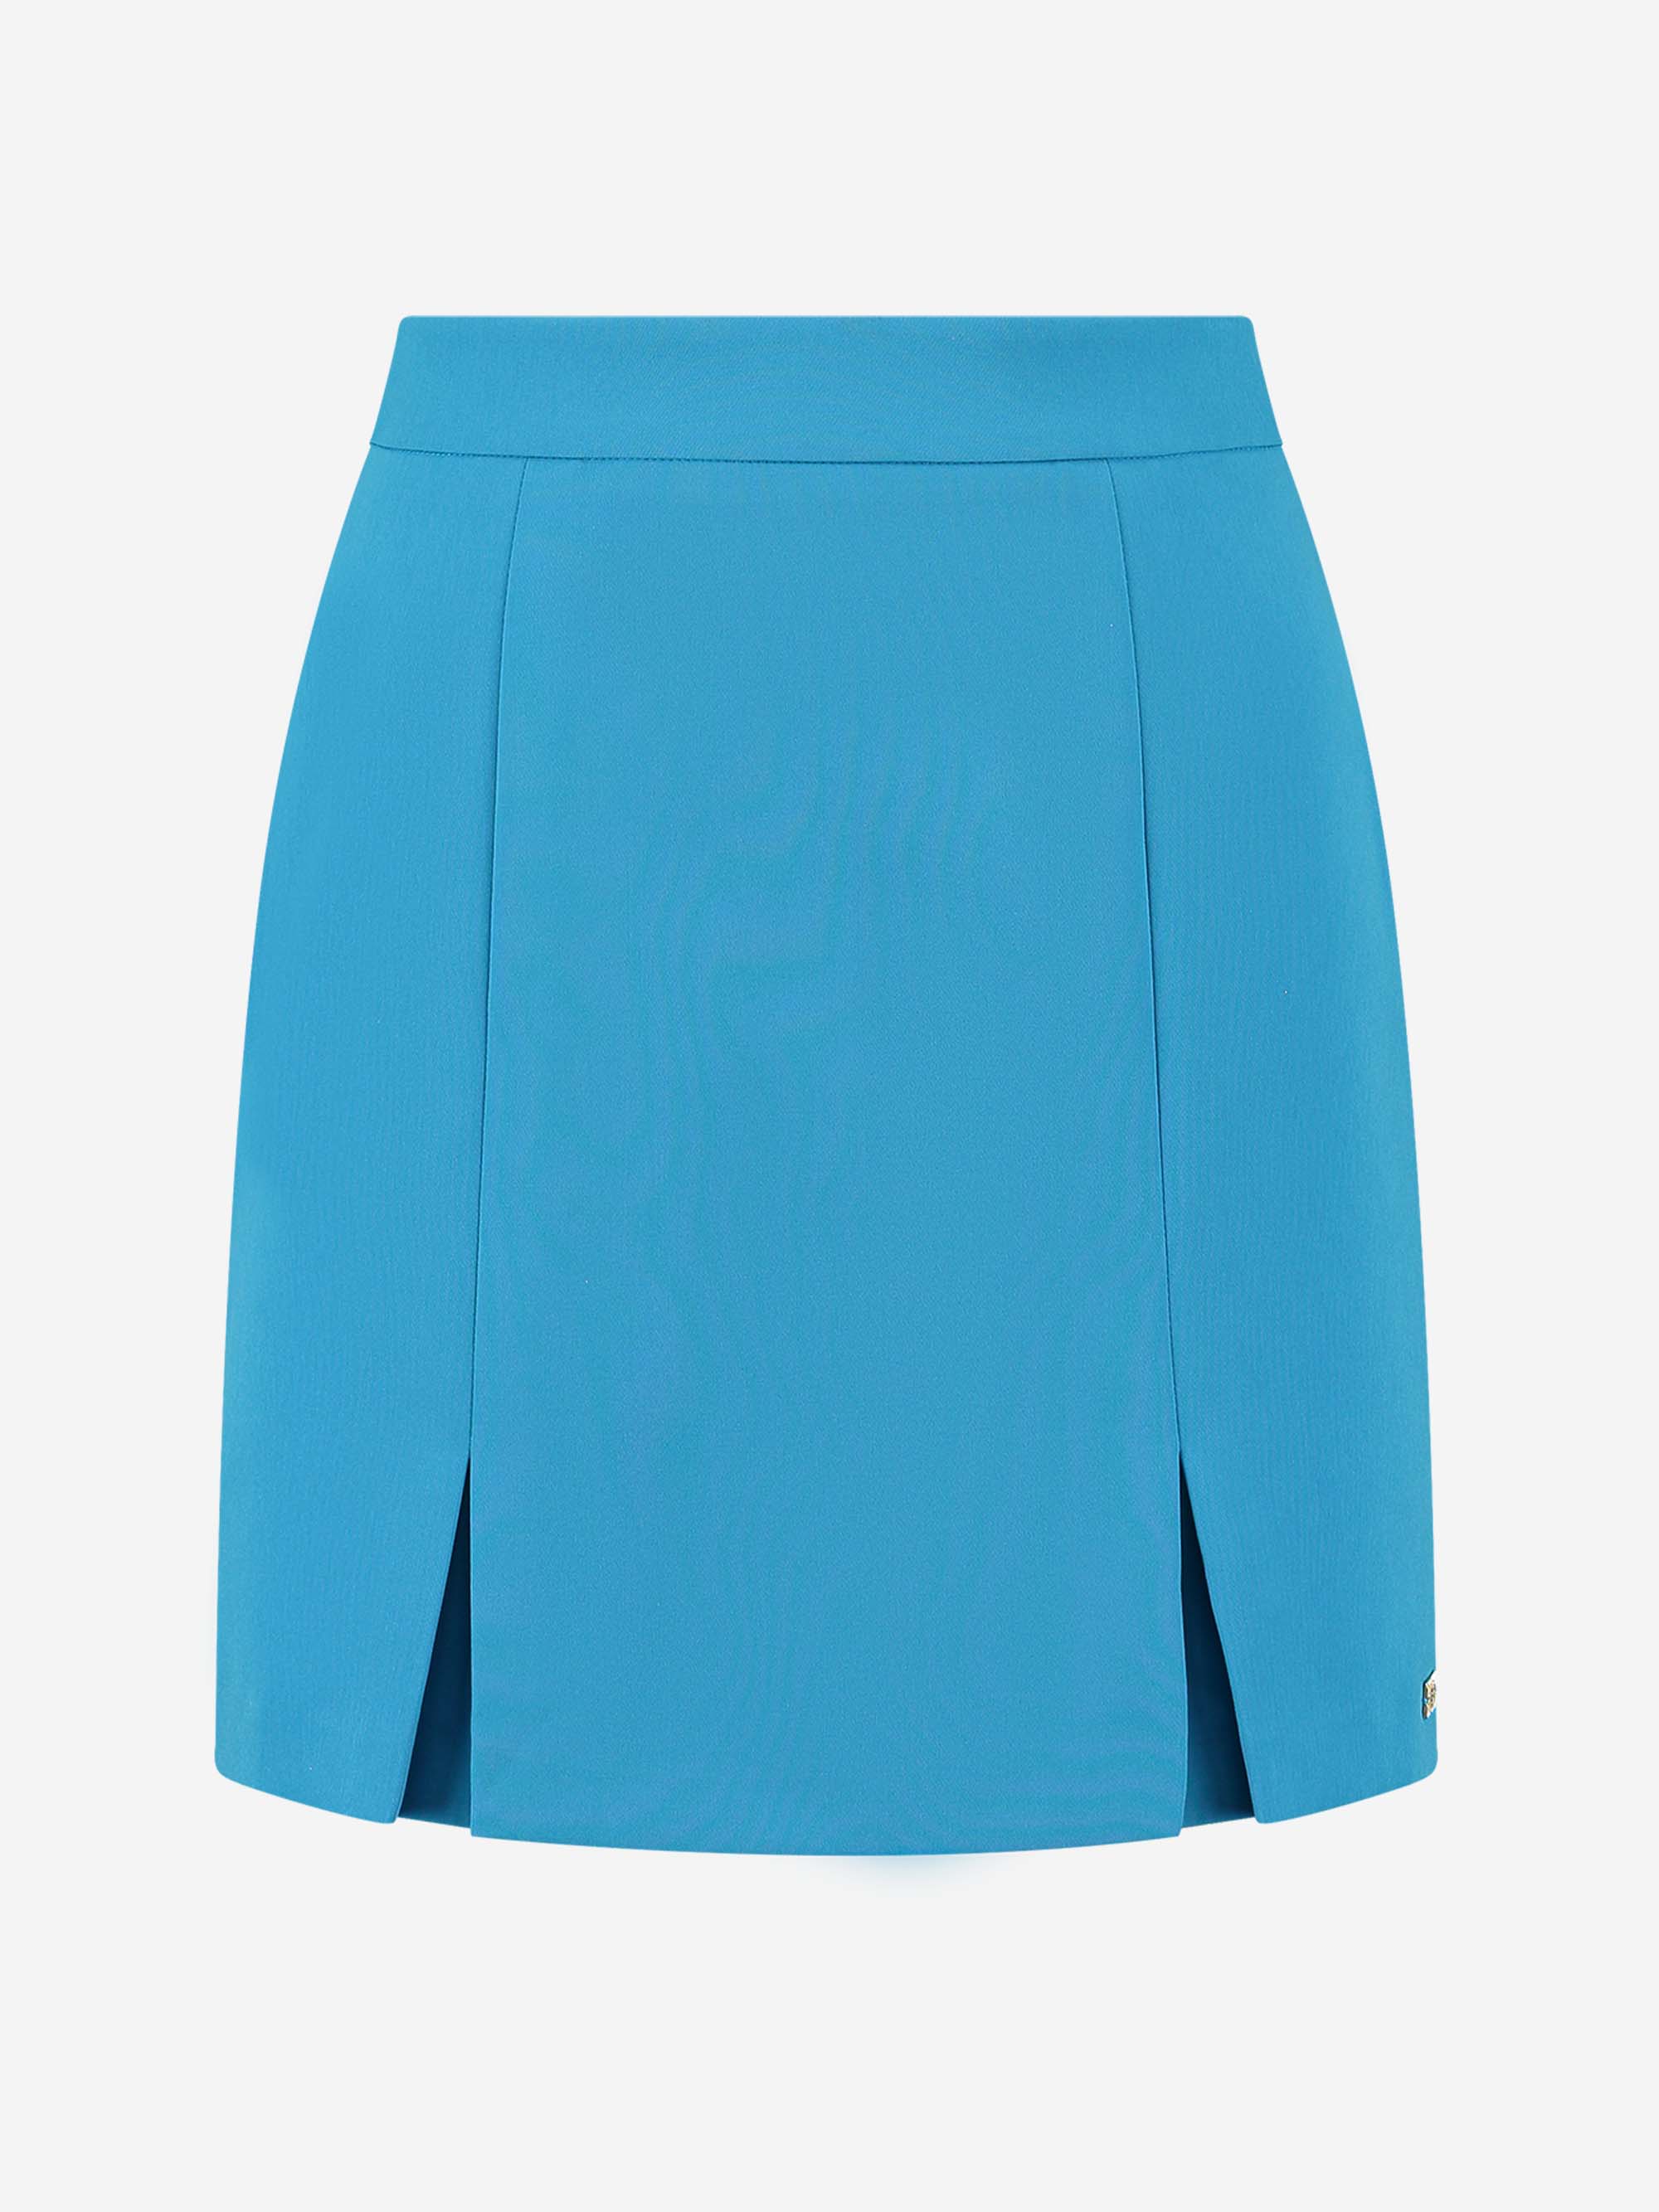 Fitted skirt with slits